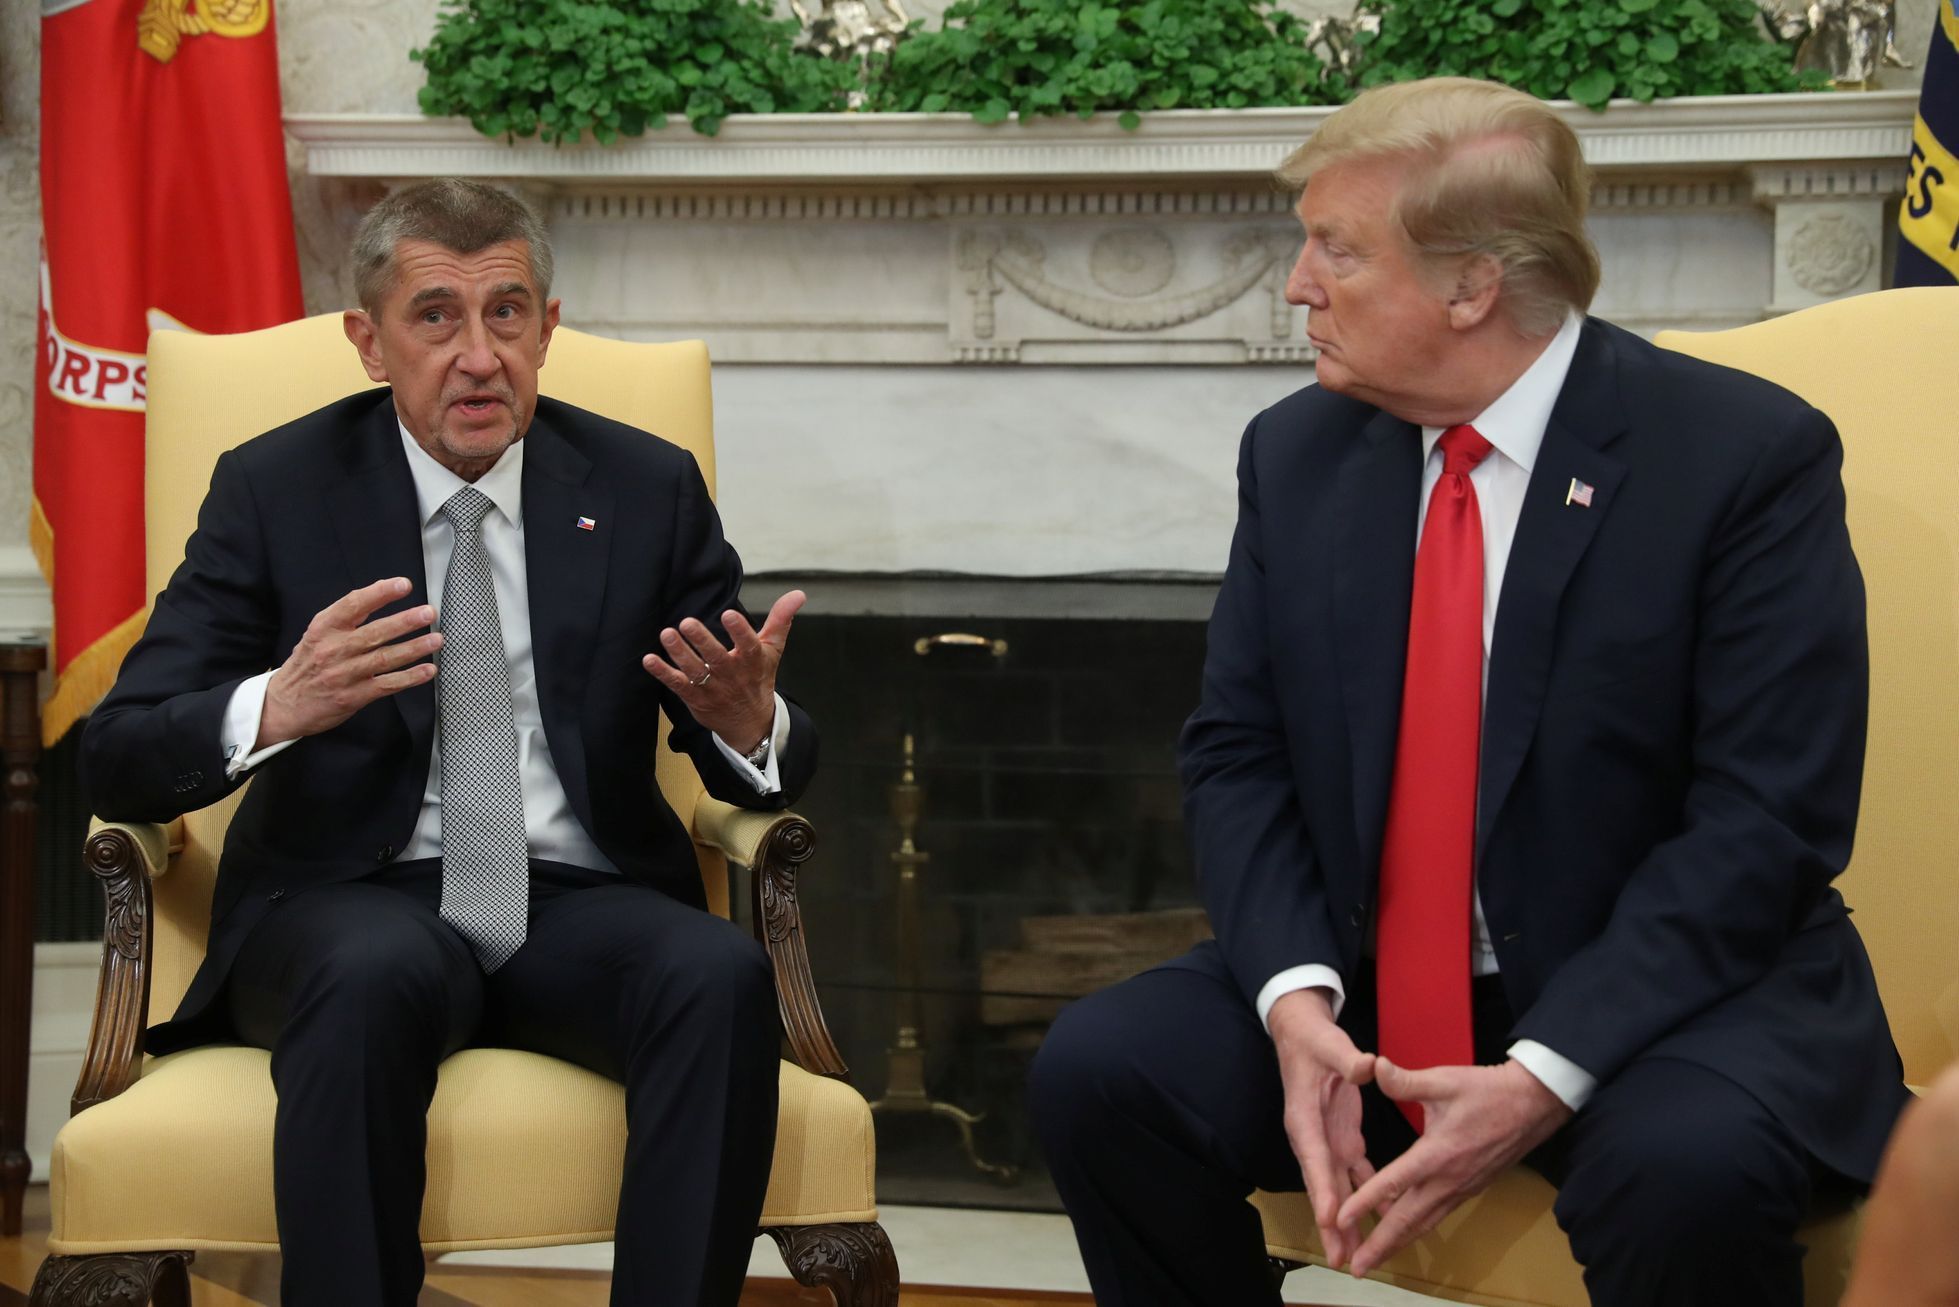 U.S. President Trump meets with Czech Republic's Prime Minister Babis at the White House in Washington